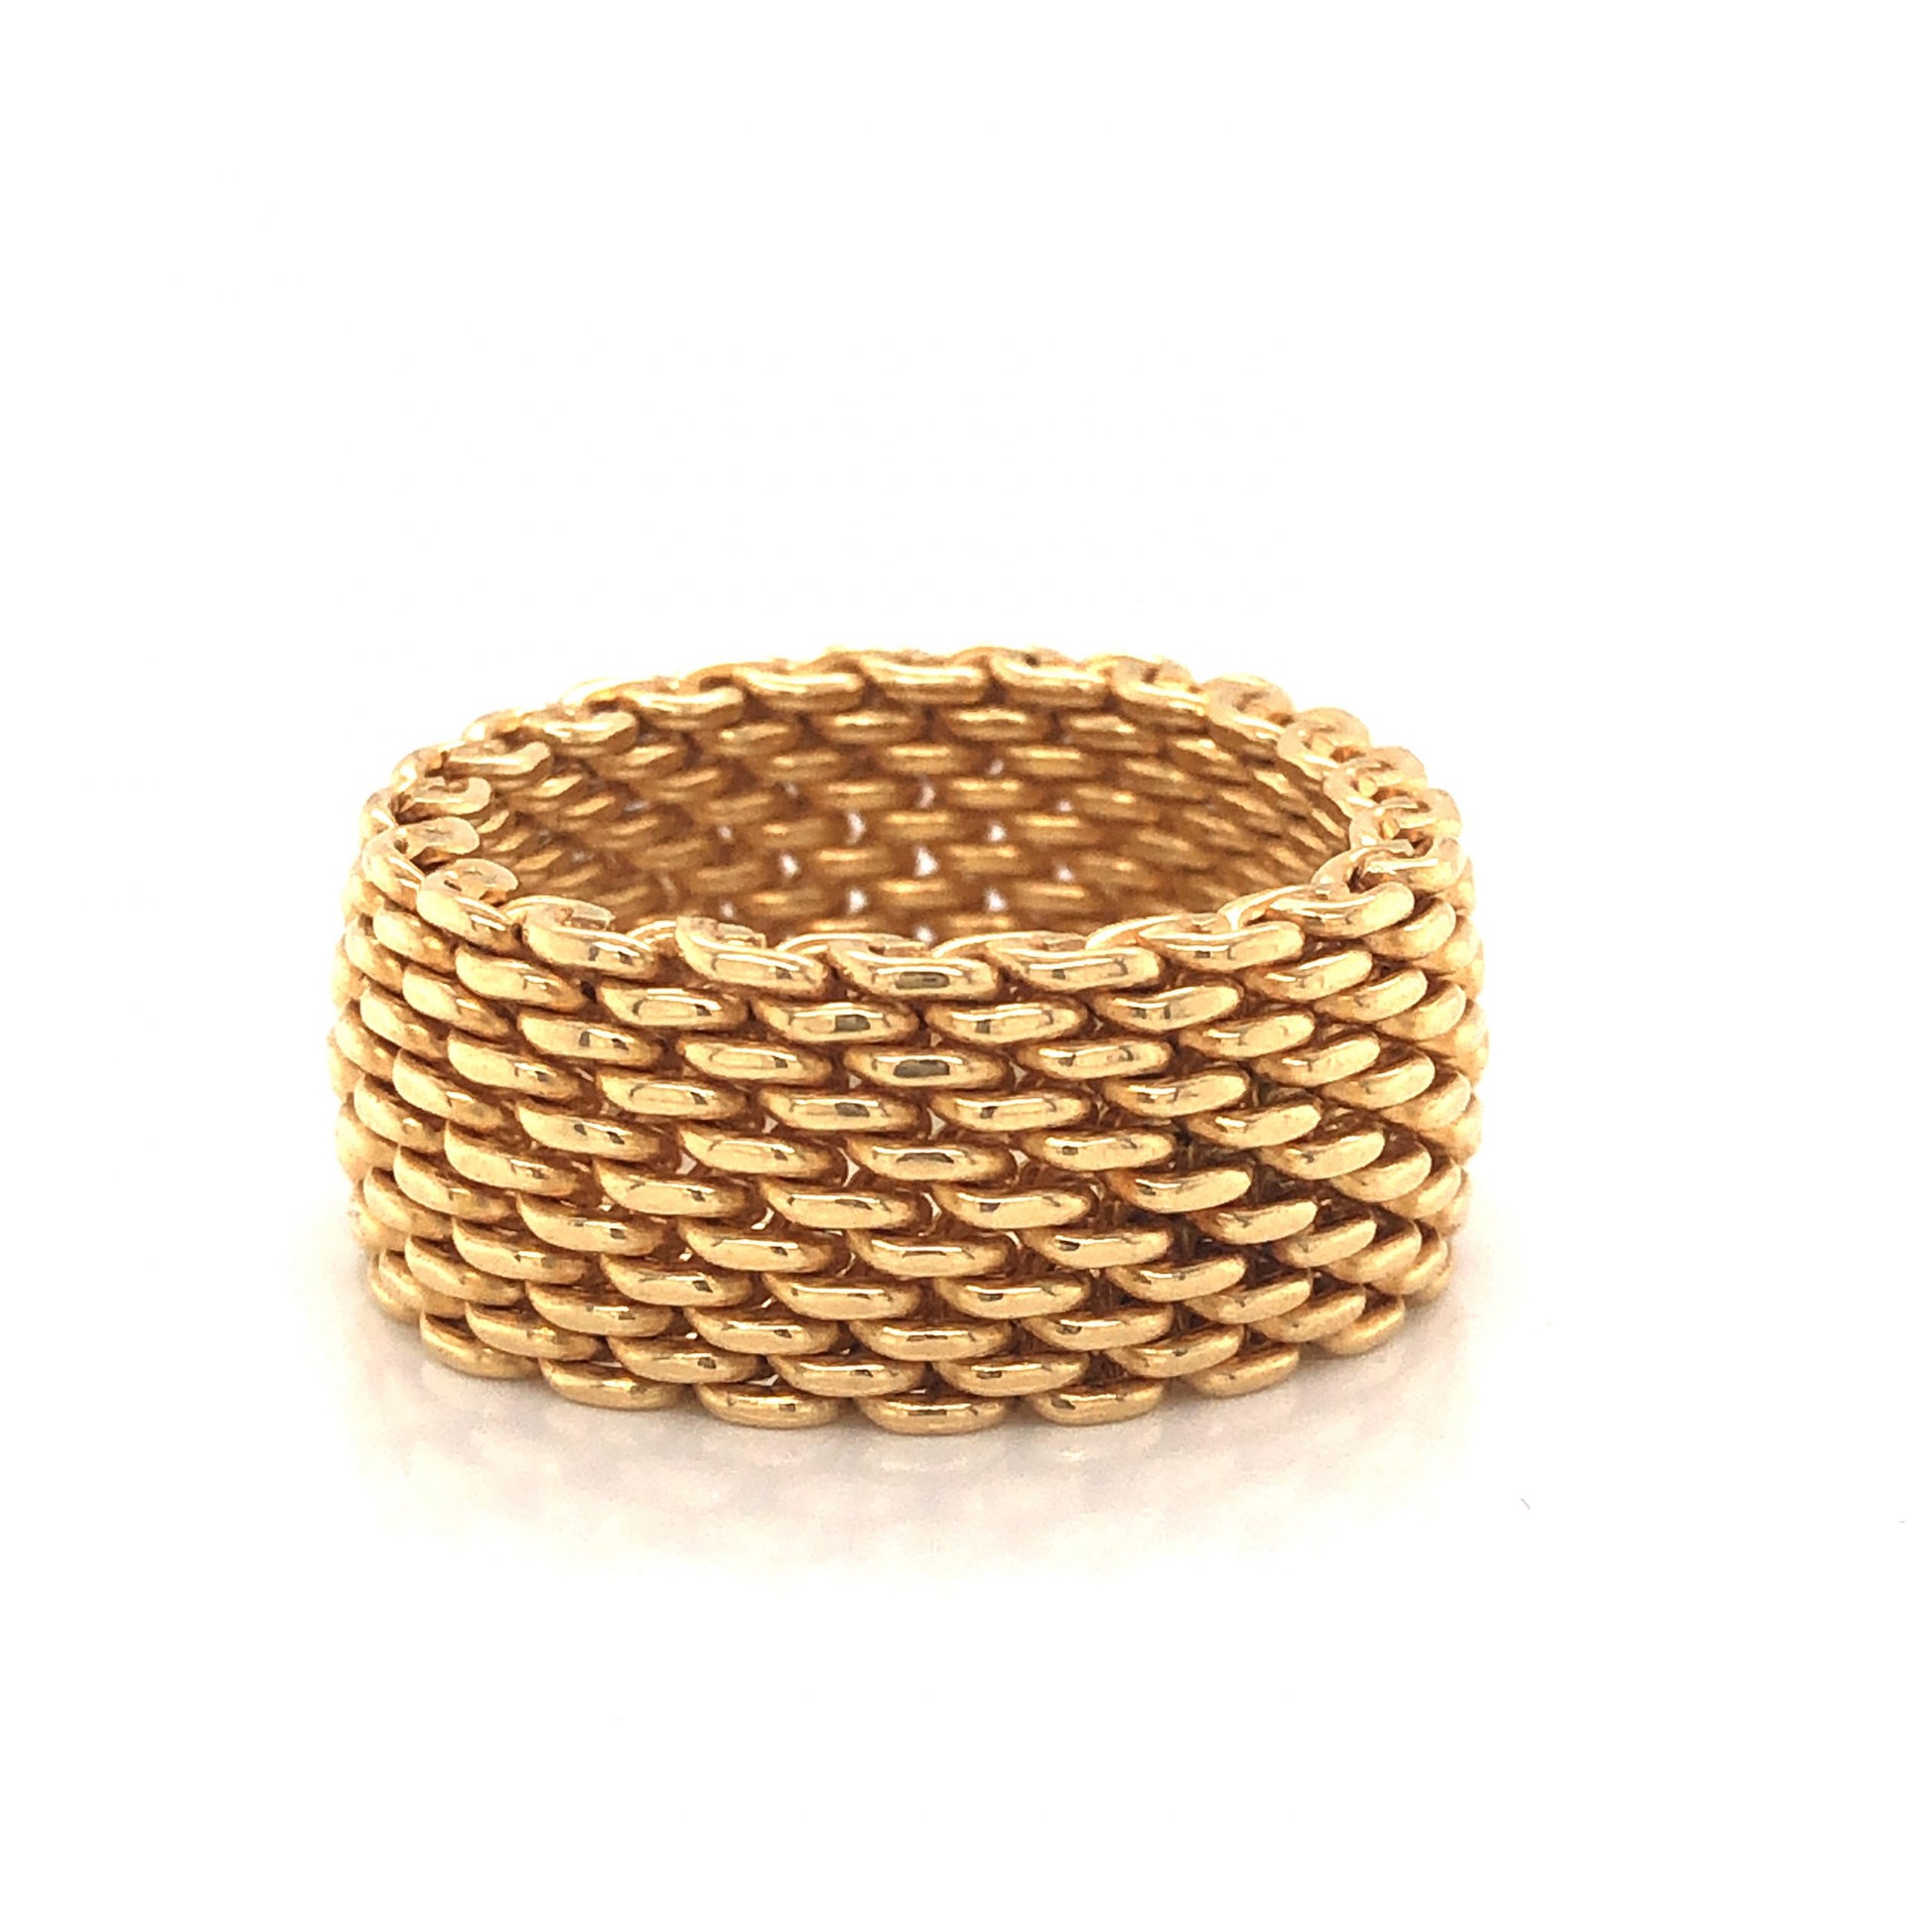 Somerset Mesh Tiffany & Co. Ring in 18K Yellow GoldComposition: PlatinumRing Size: 9Total Gram Weight: 14.1 gInscription: T&Co 750